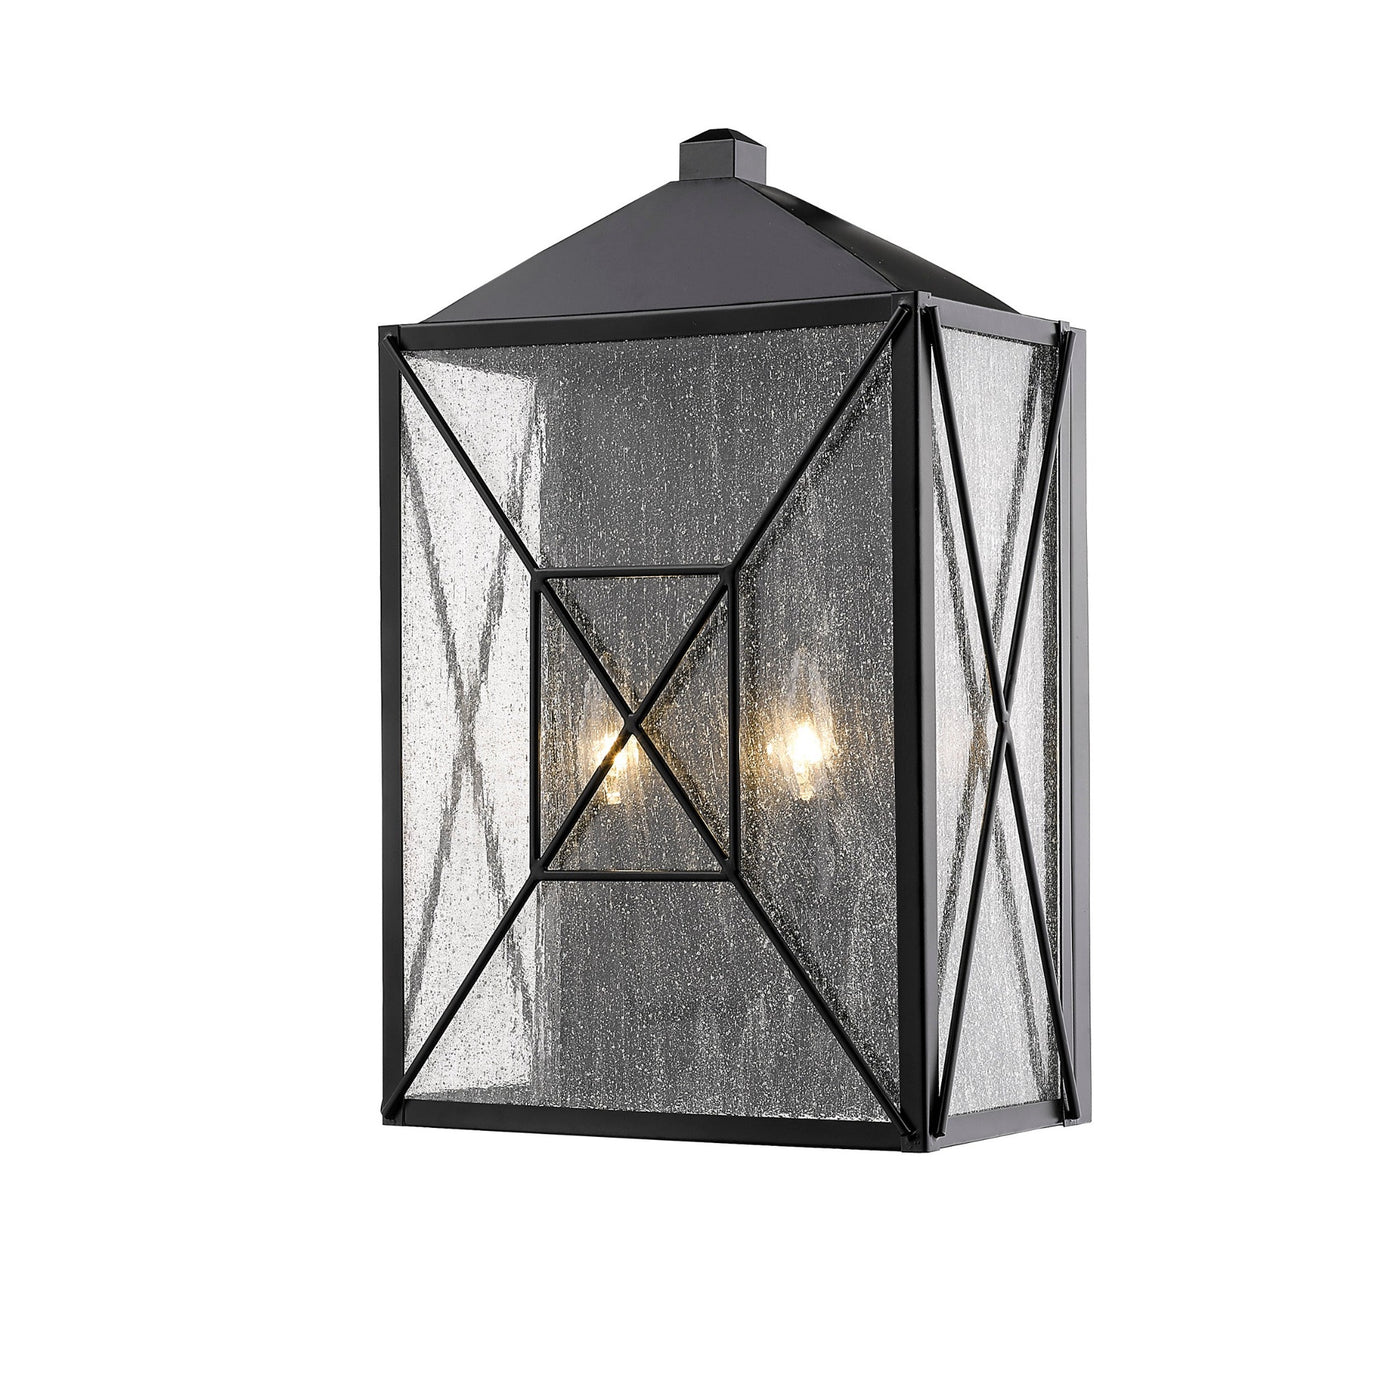 Millennium Lighting 2 Light 18" Outdoor Wall Sconce, Caswell Collection